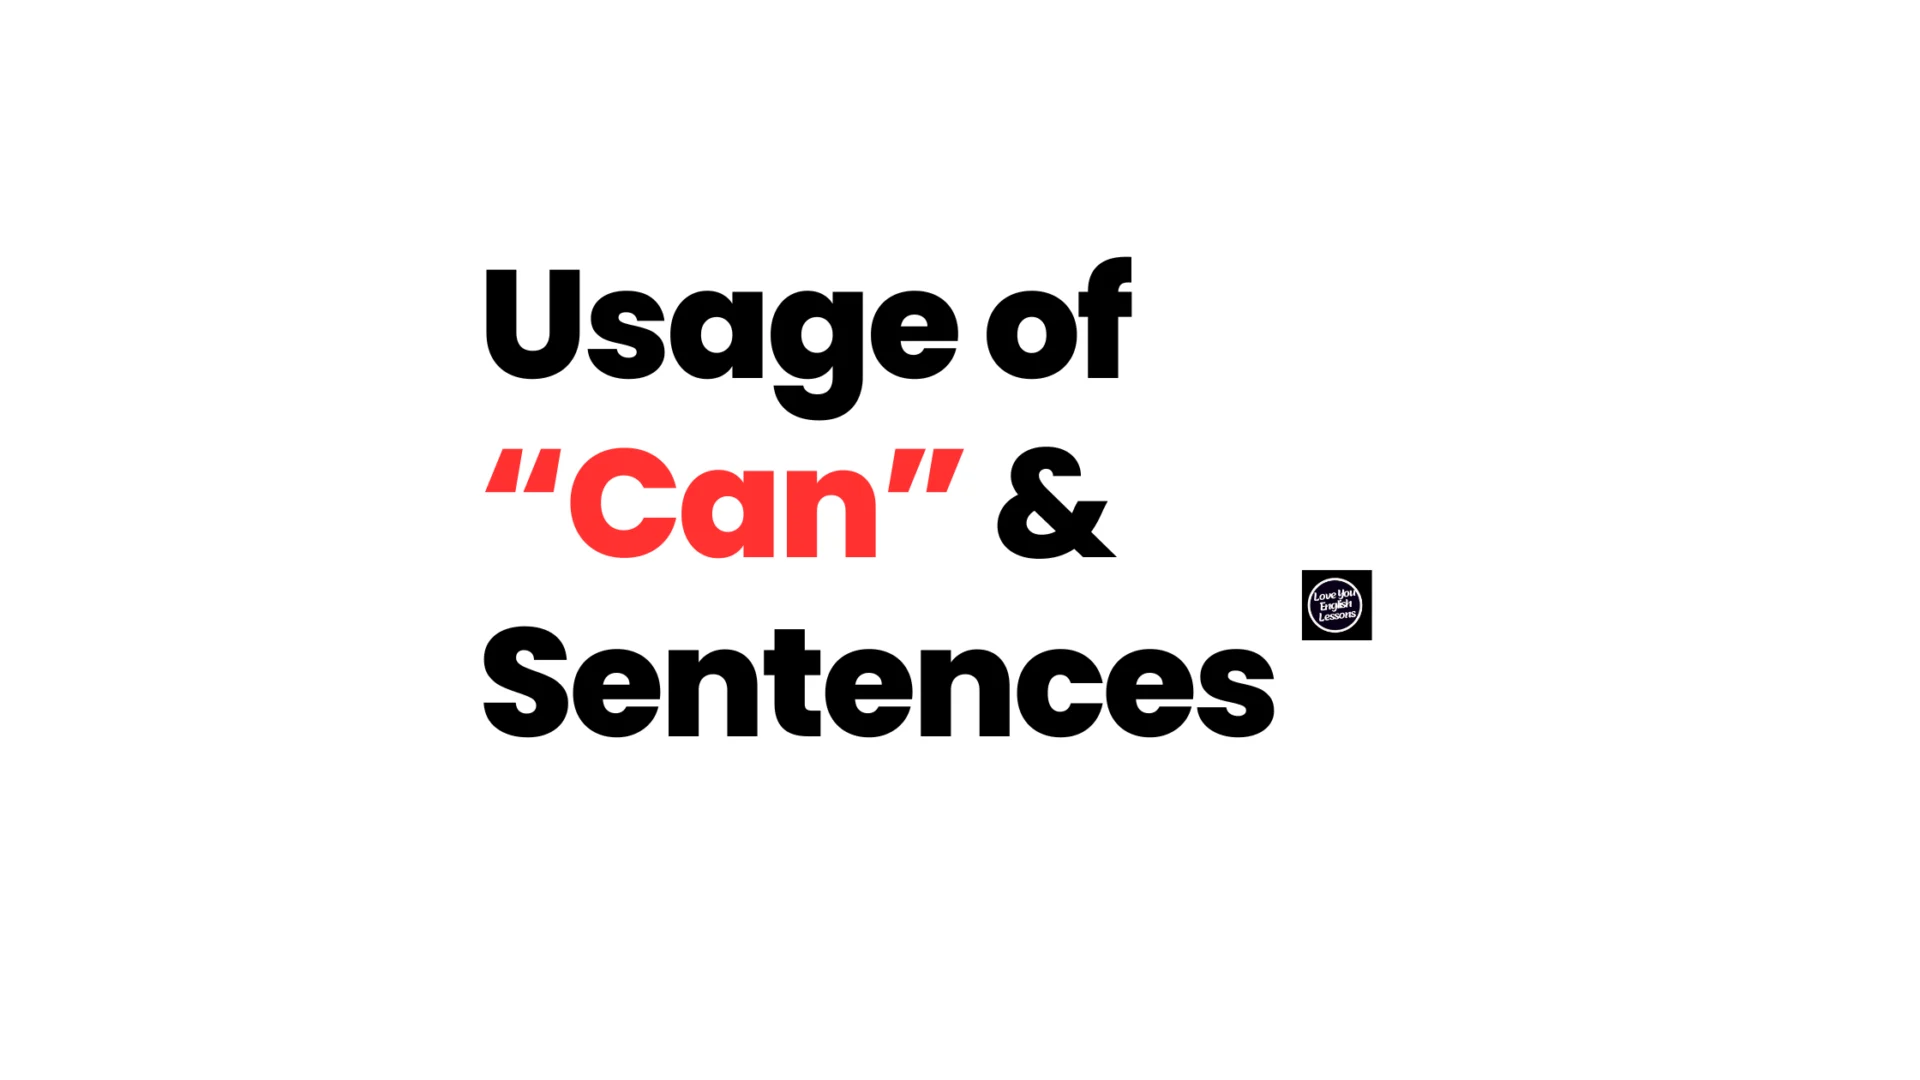 Usage of can and sentences